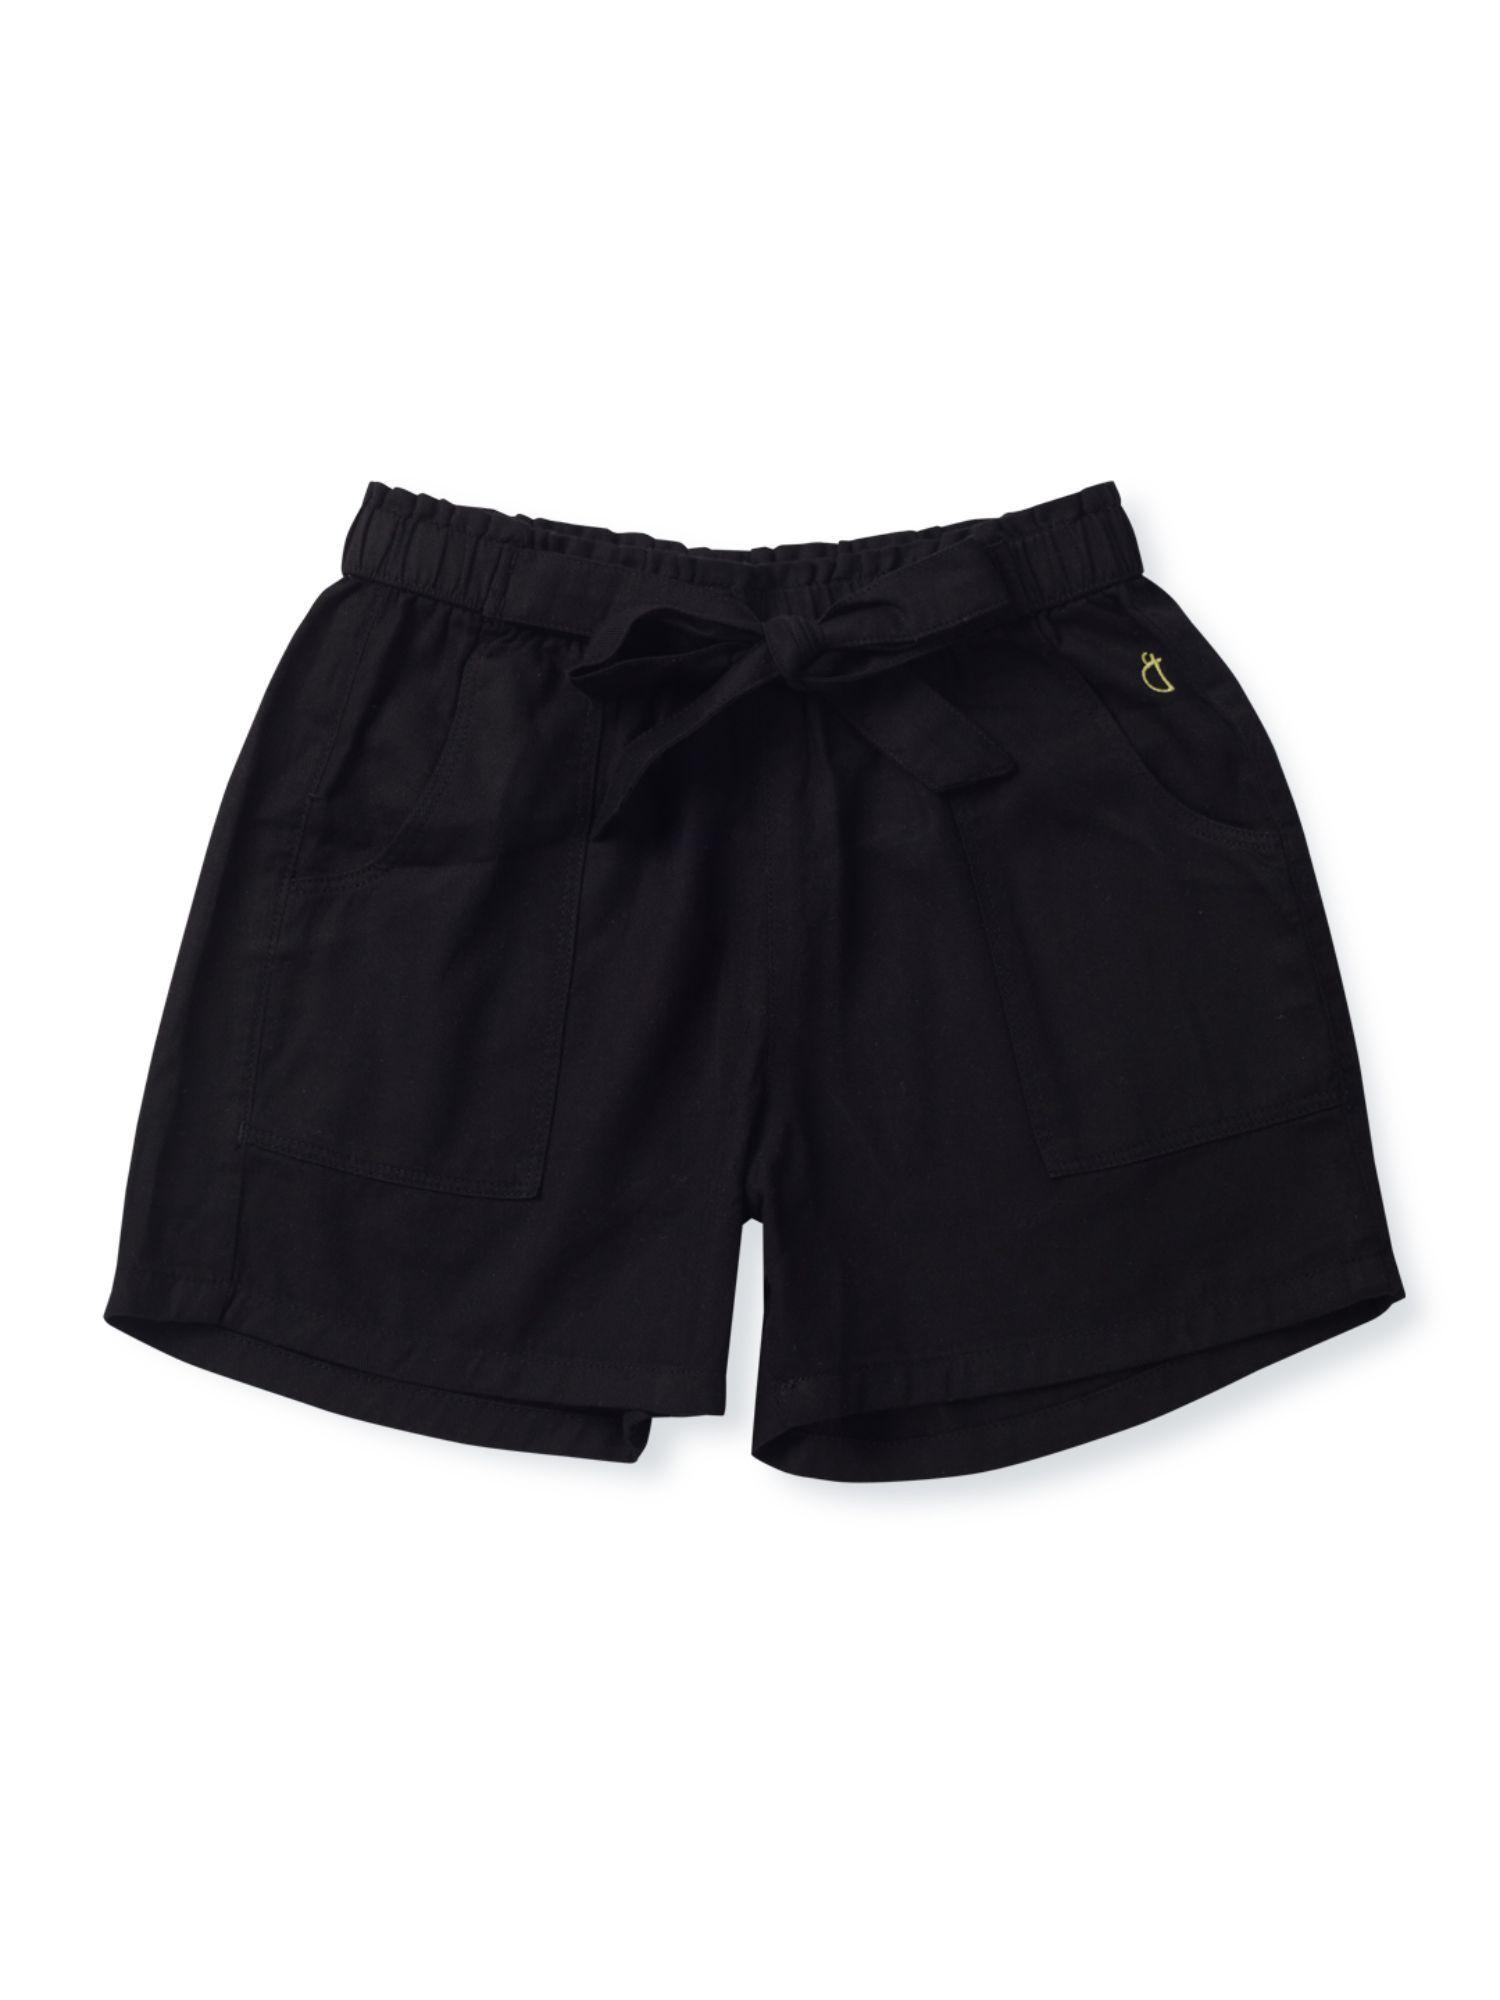 girls black solid cotton elasticated shorts